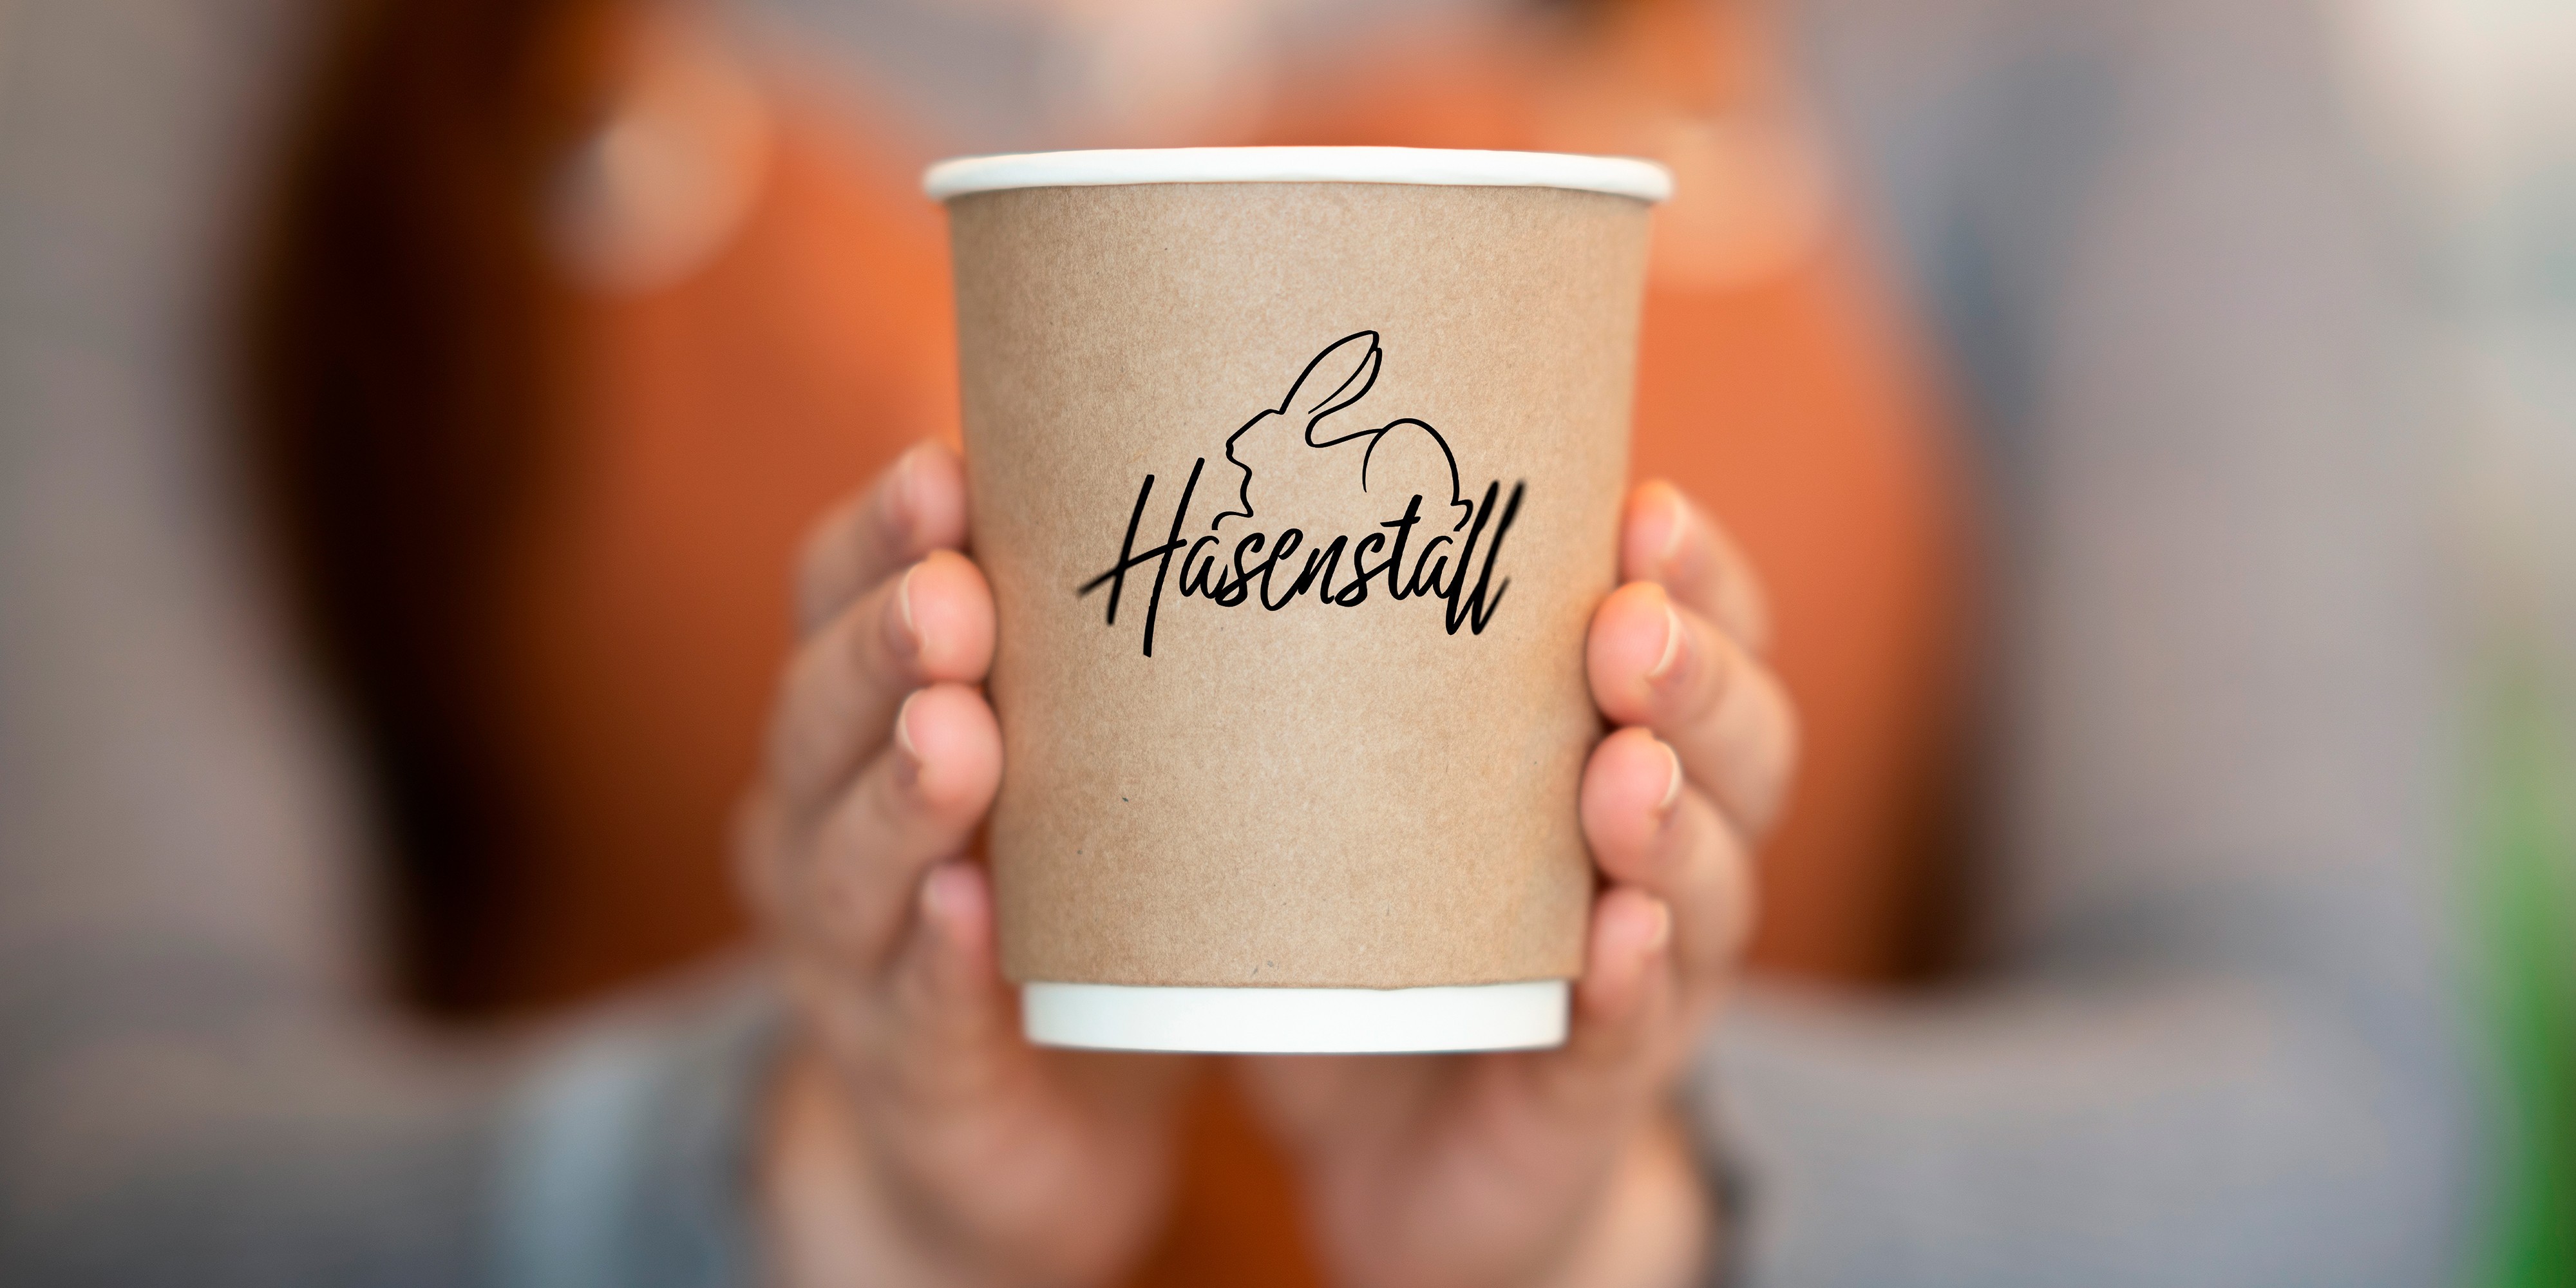 Hasenstall cafe in your house